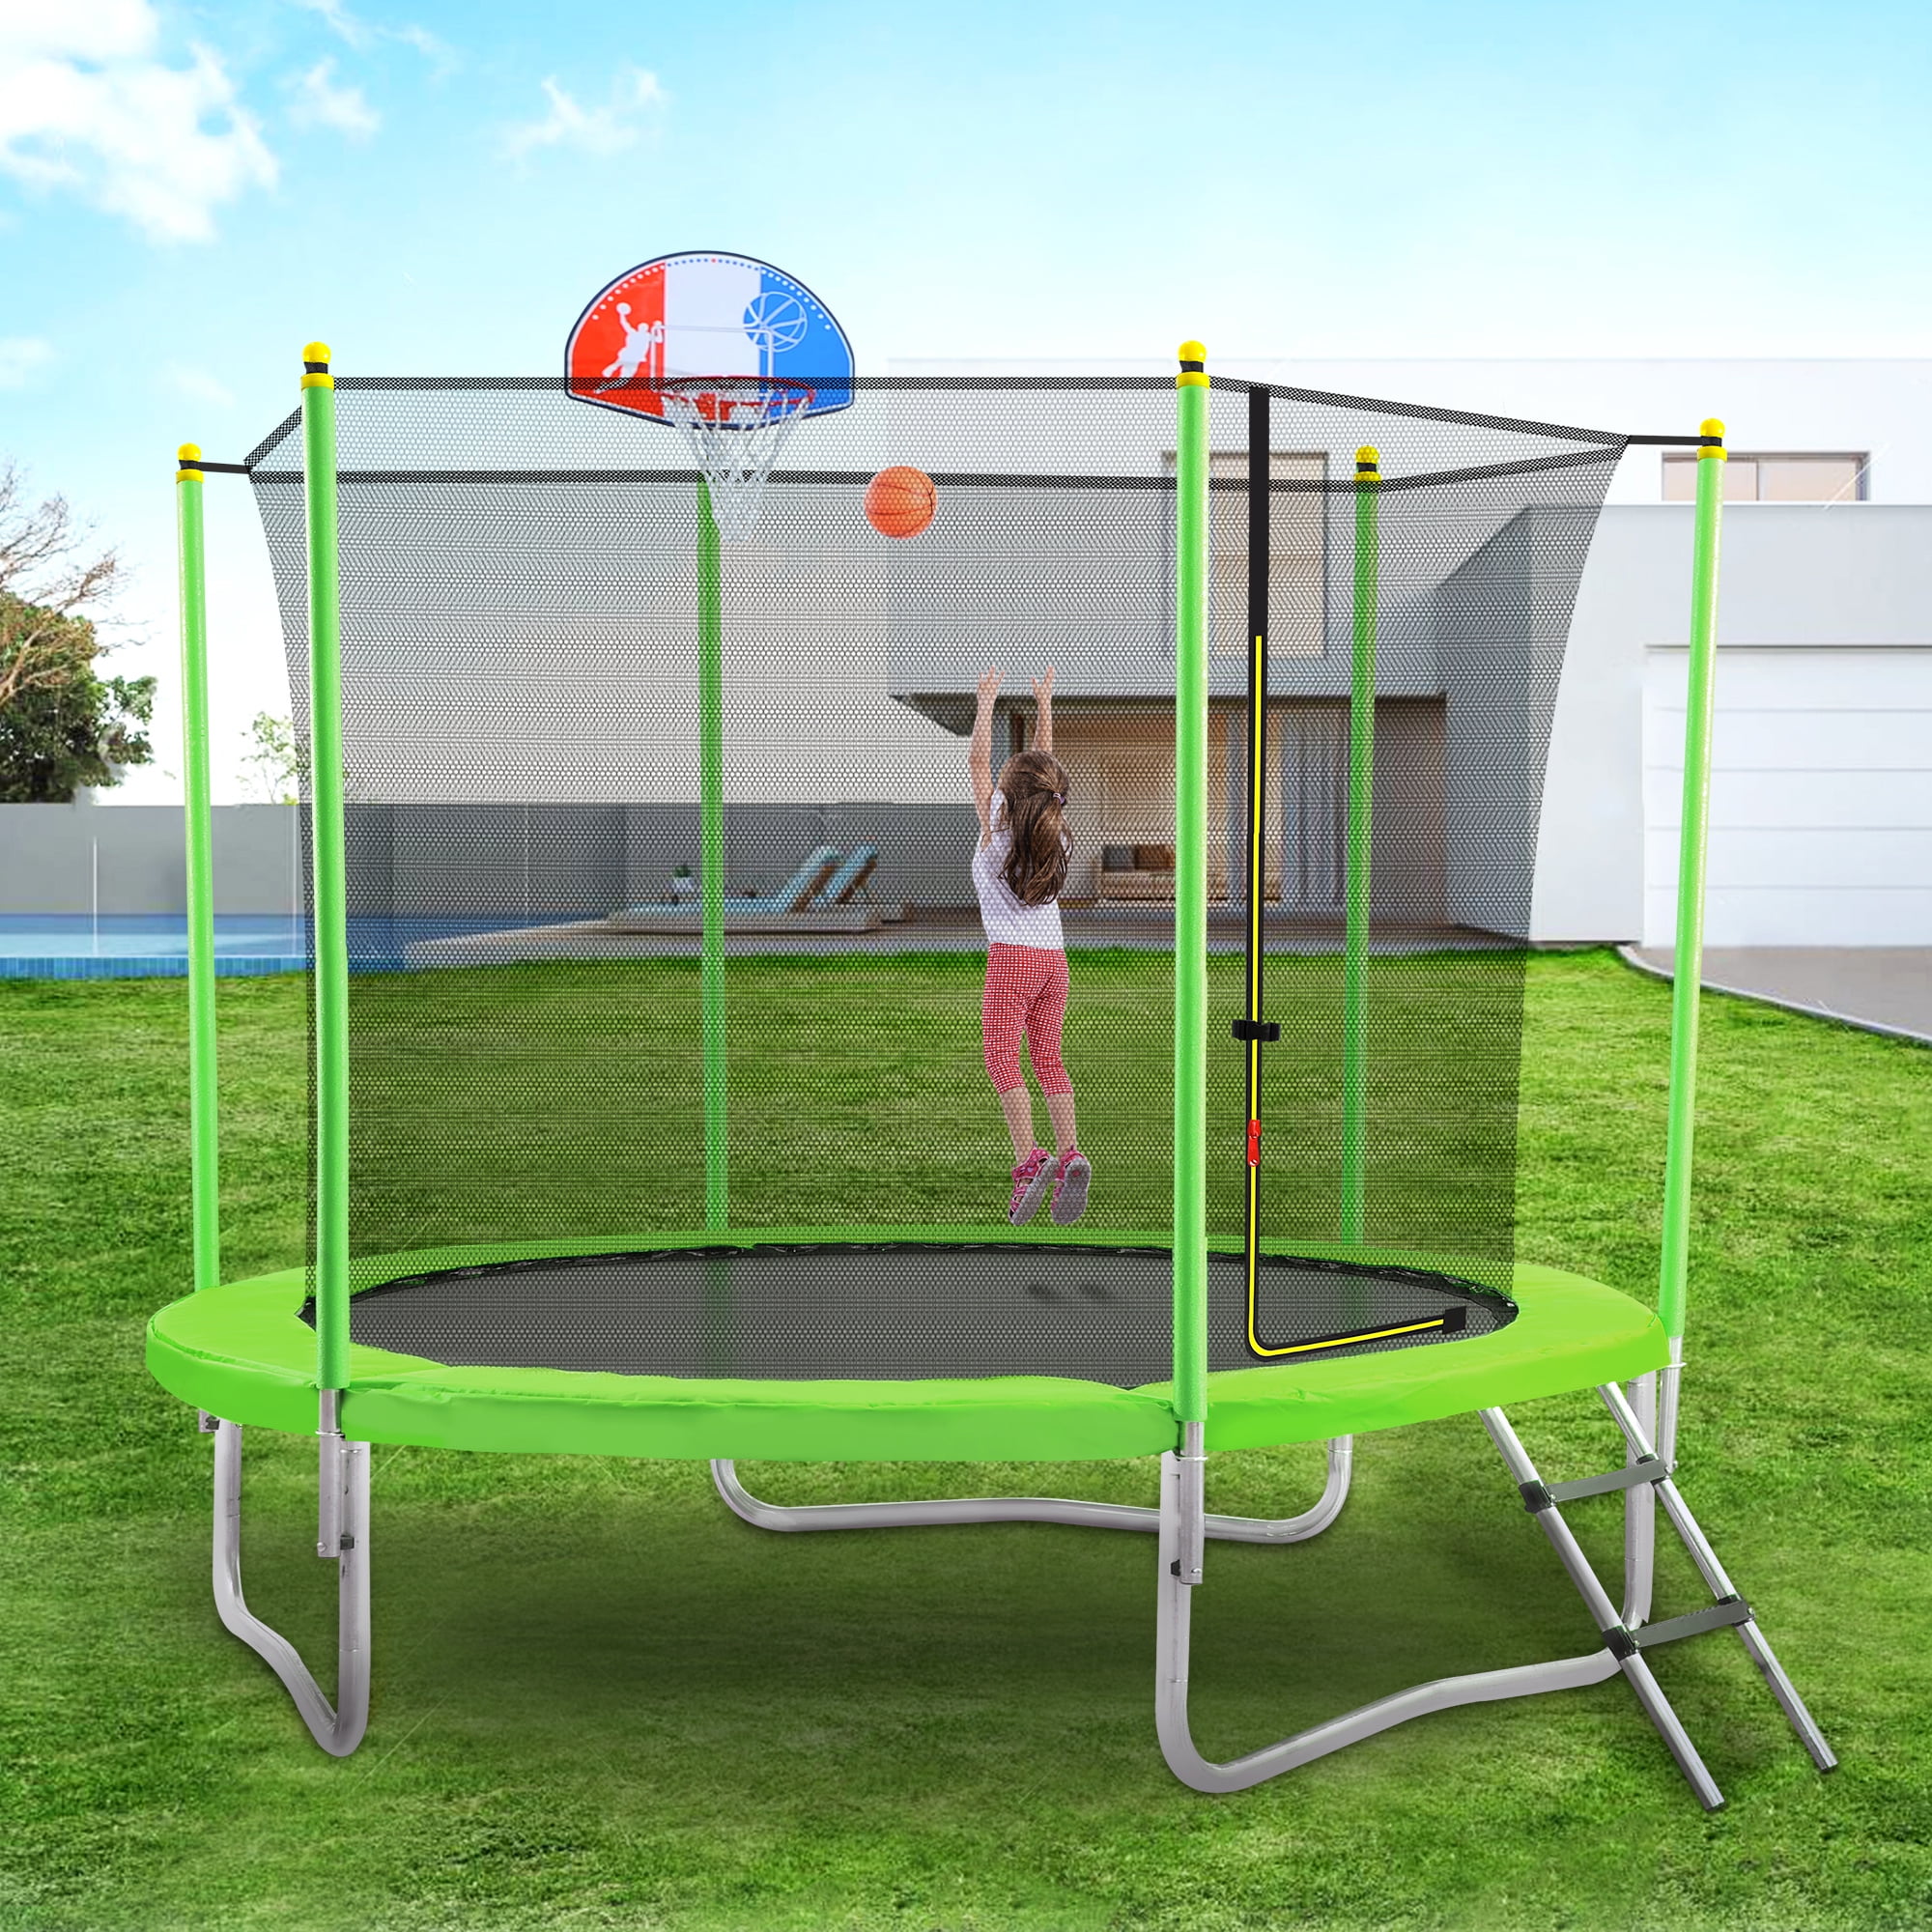 Green Trampoline Basketball Hoop Trampoline Accessory Toy Safe and Fun for Kids 